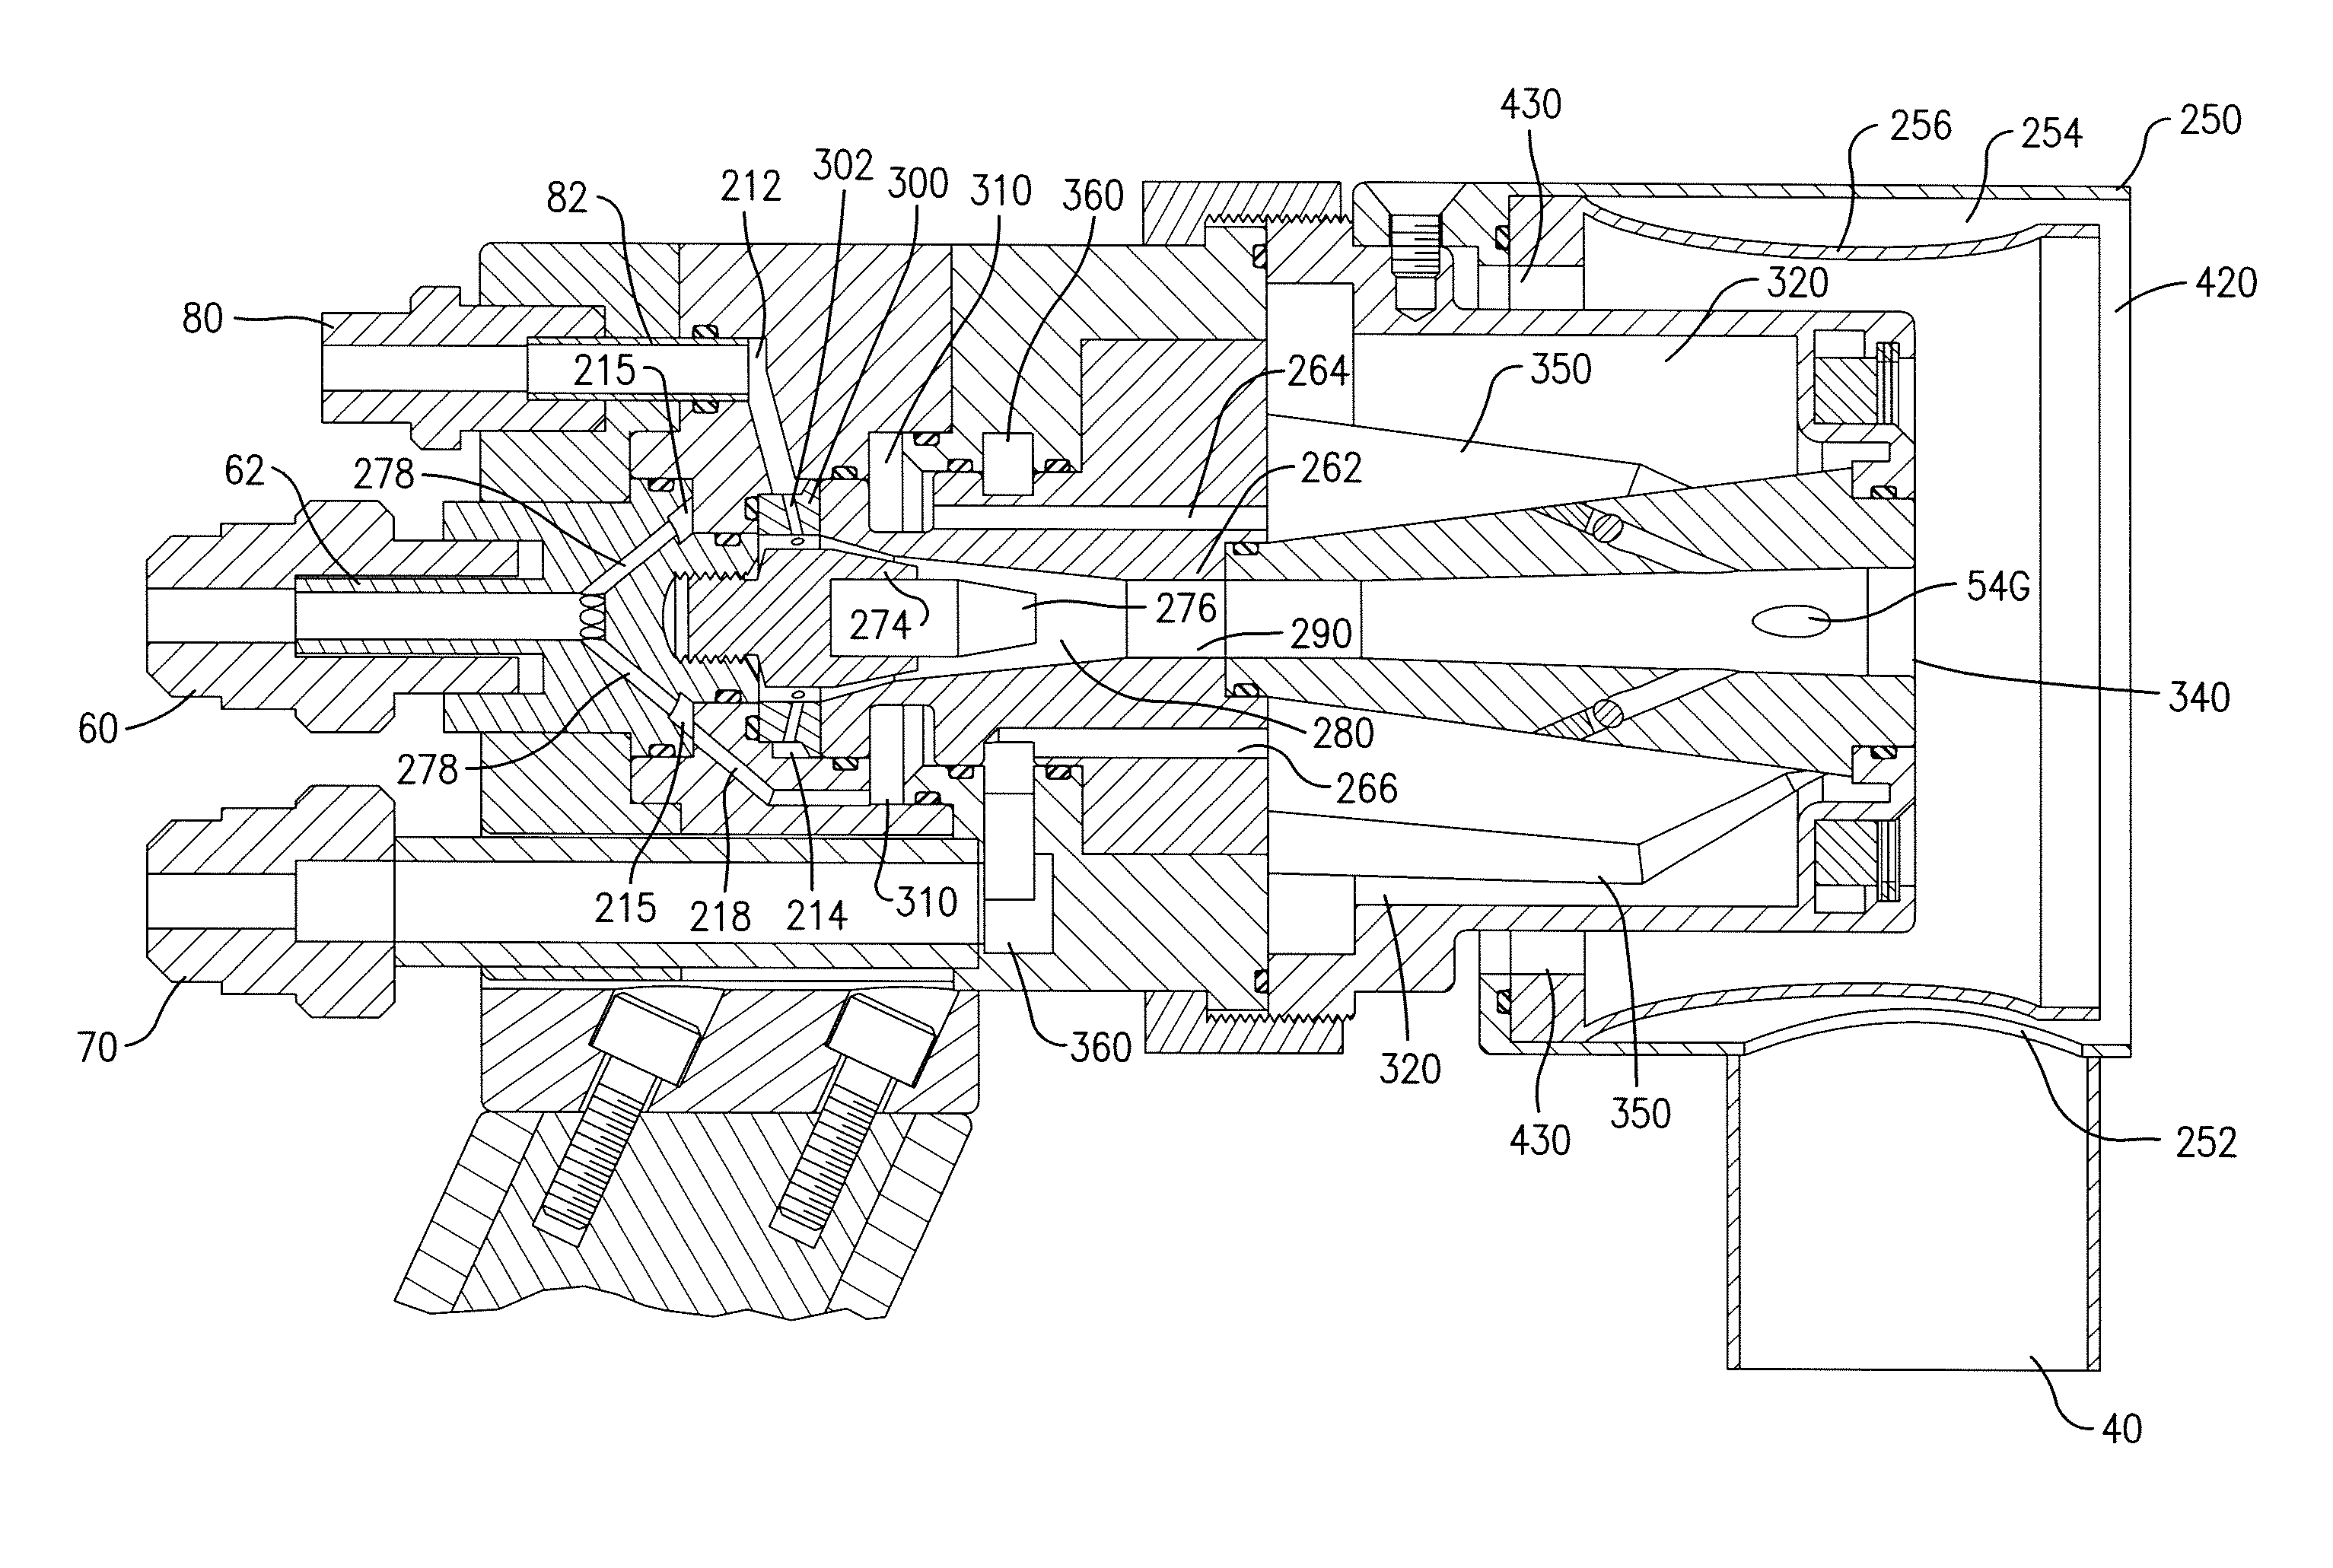 Apparatus and method for applying antifoulants to marine vessels